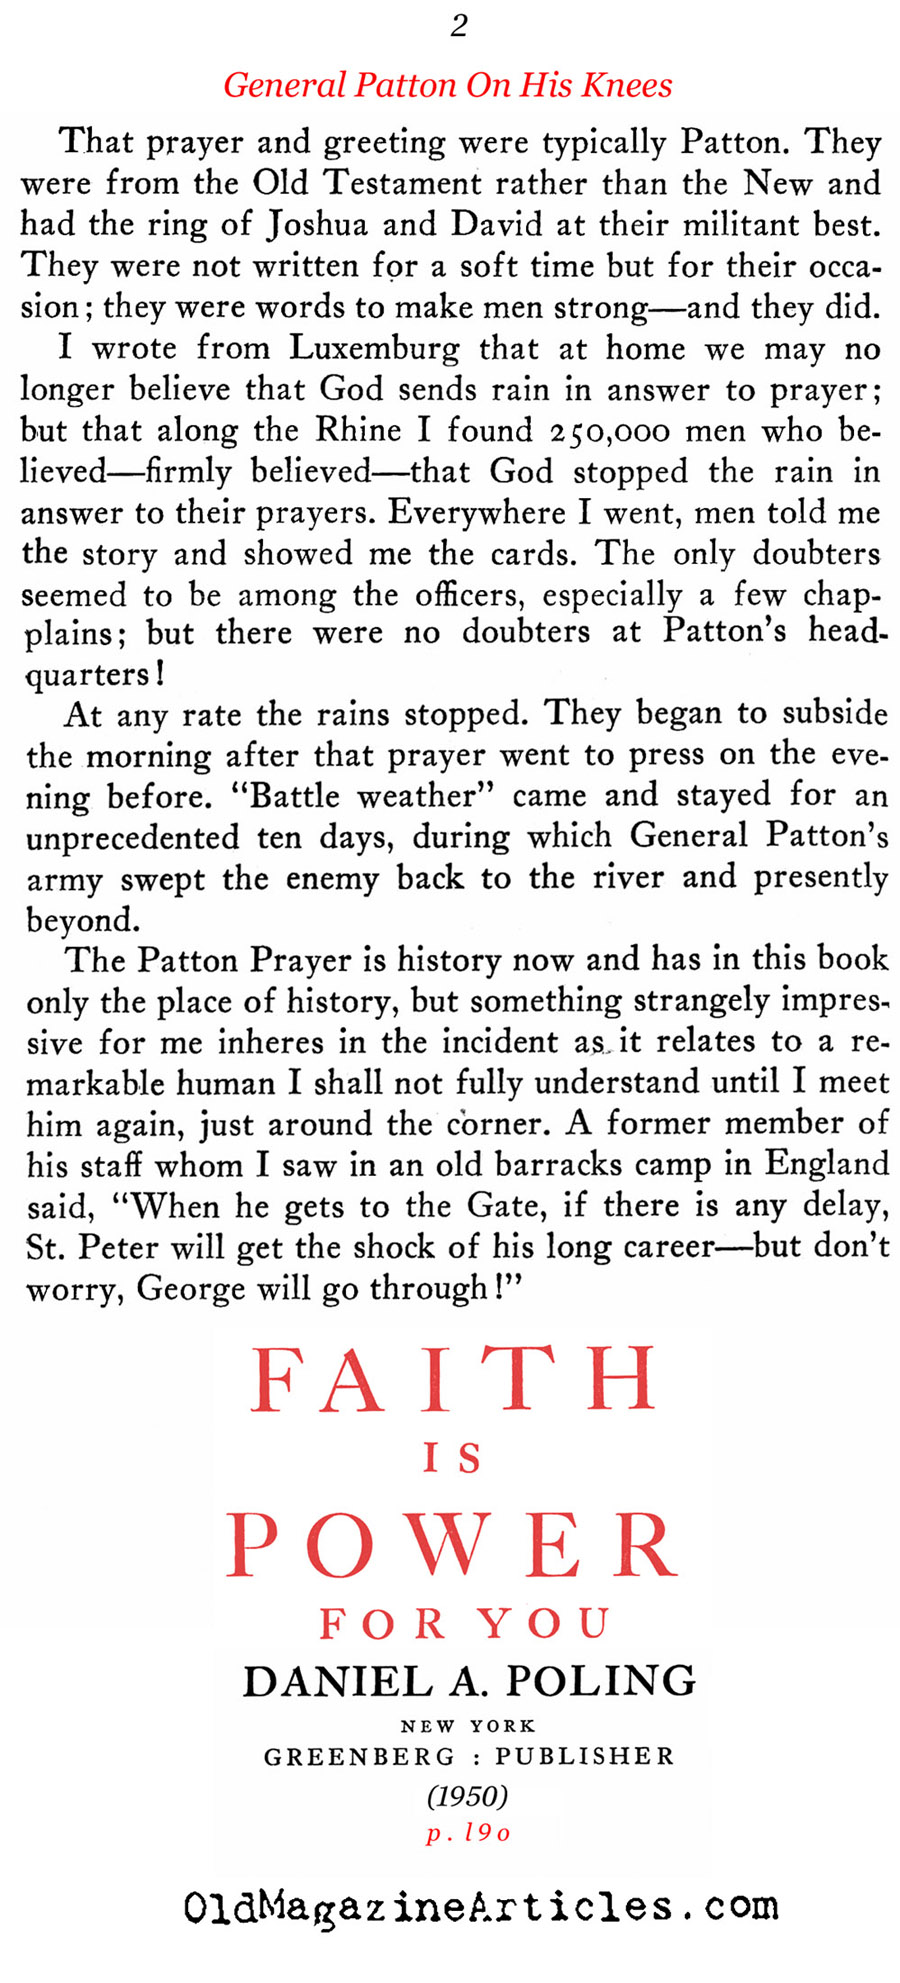 General Patton's Prayer for Battle Weather (Faith Is Power For You, 1950)